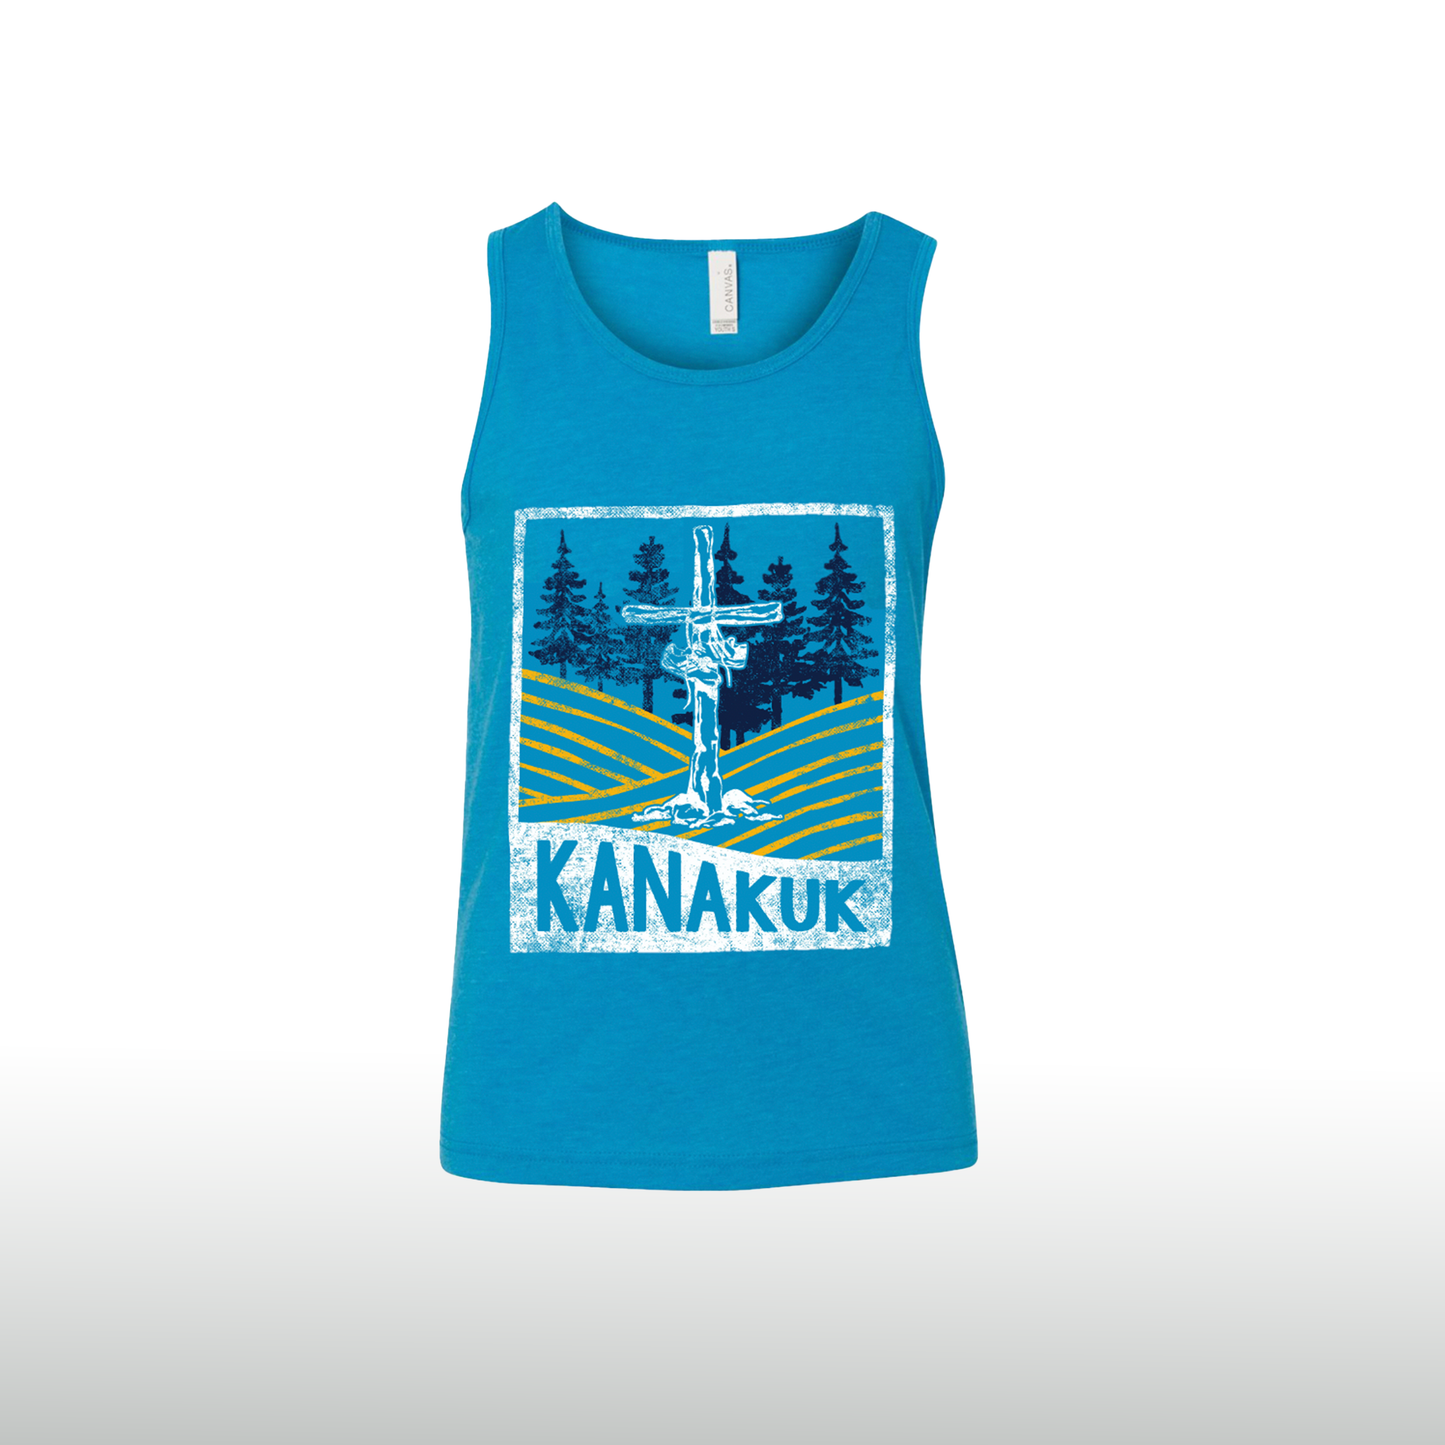 Youth CWTS Tank, Neon Blue